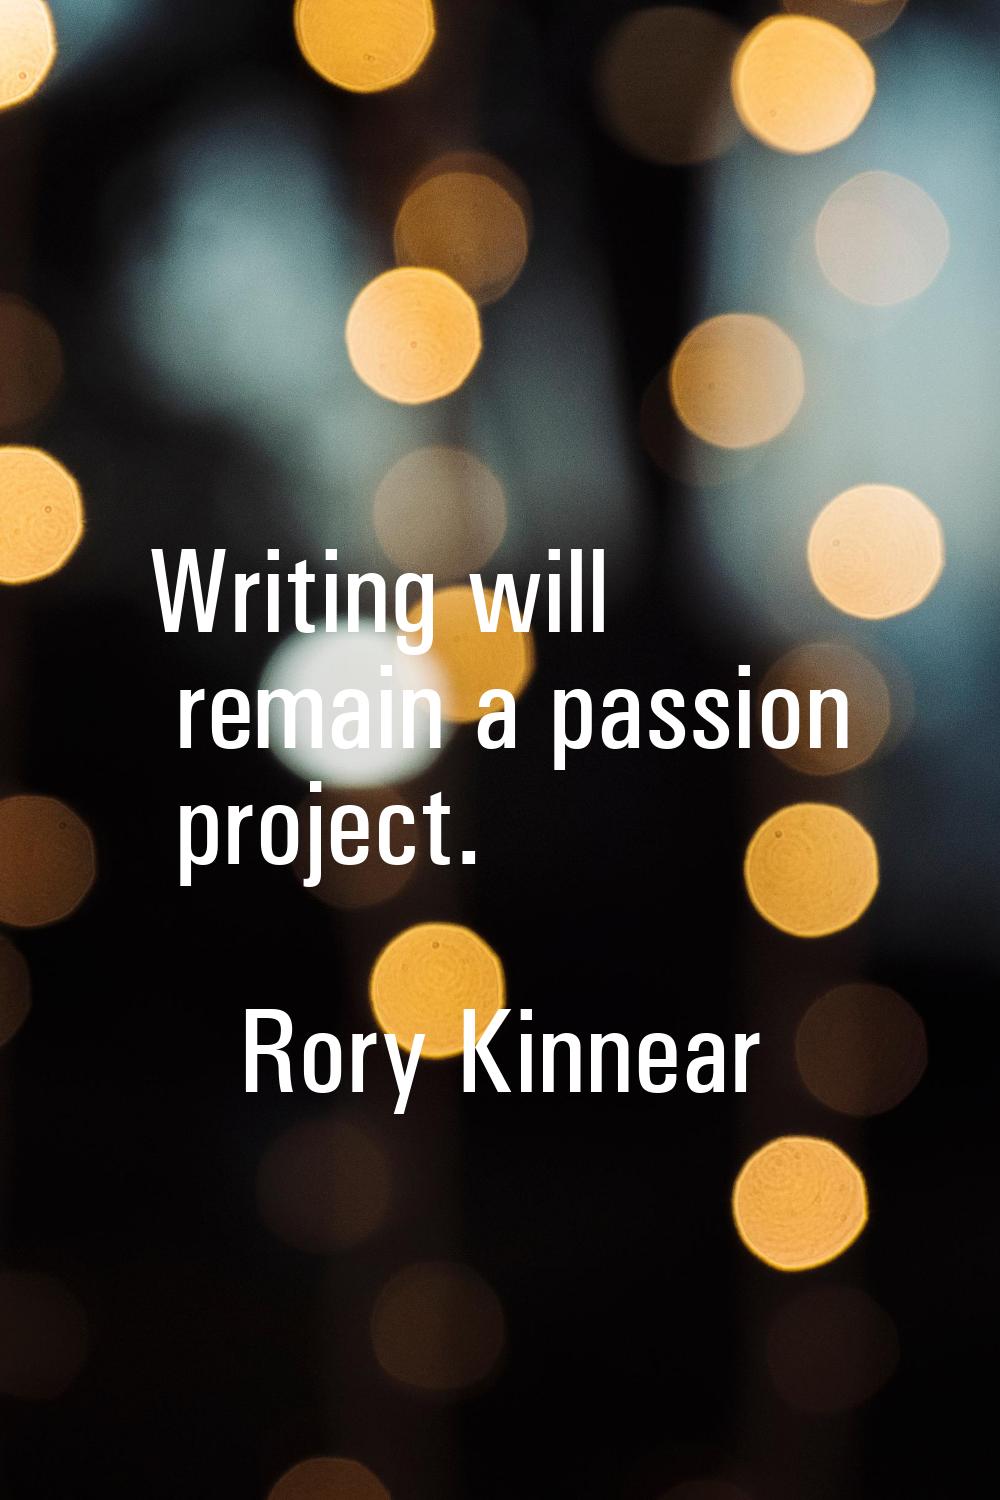 Writing will remain a passion project.